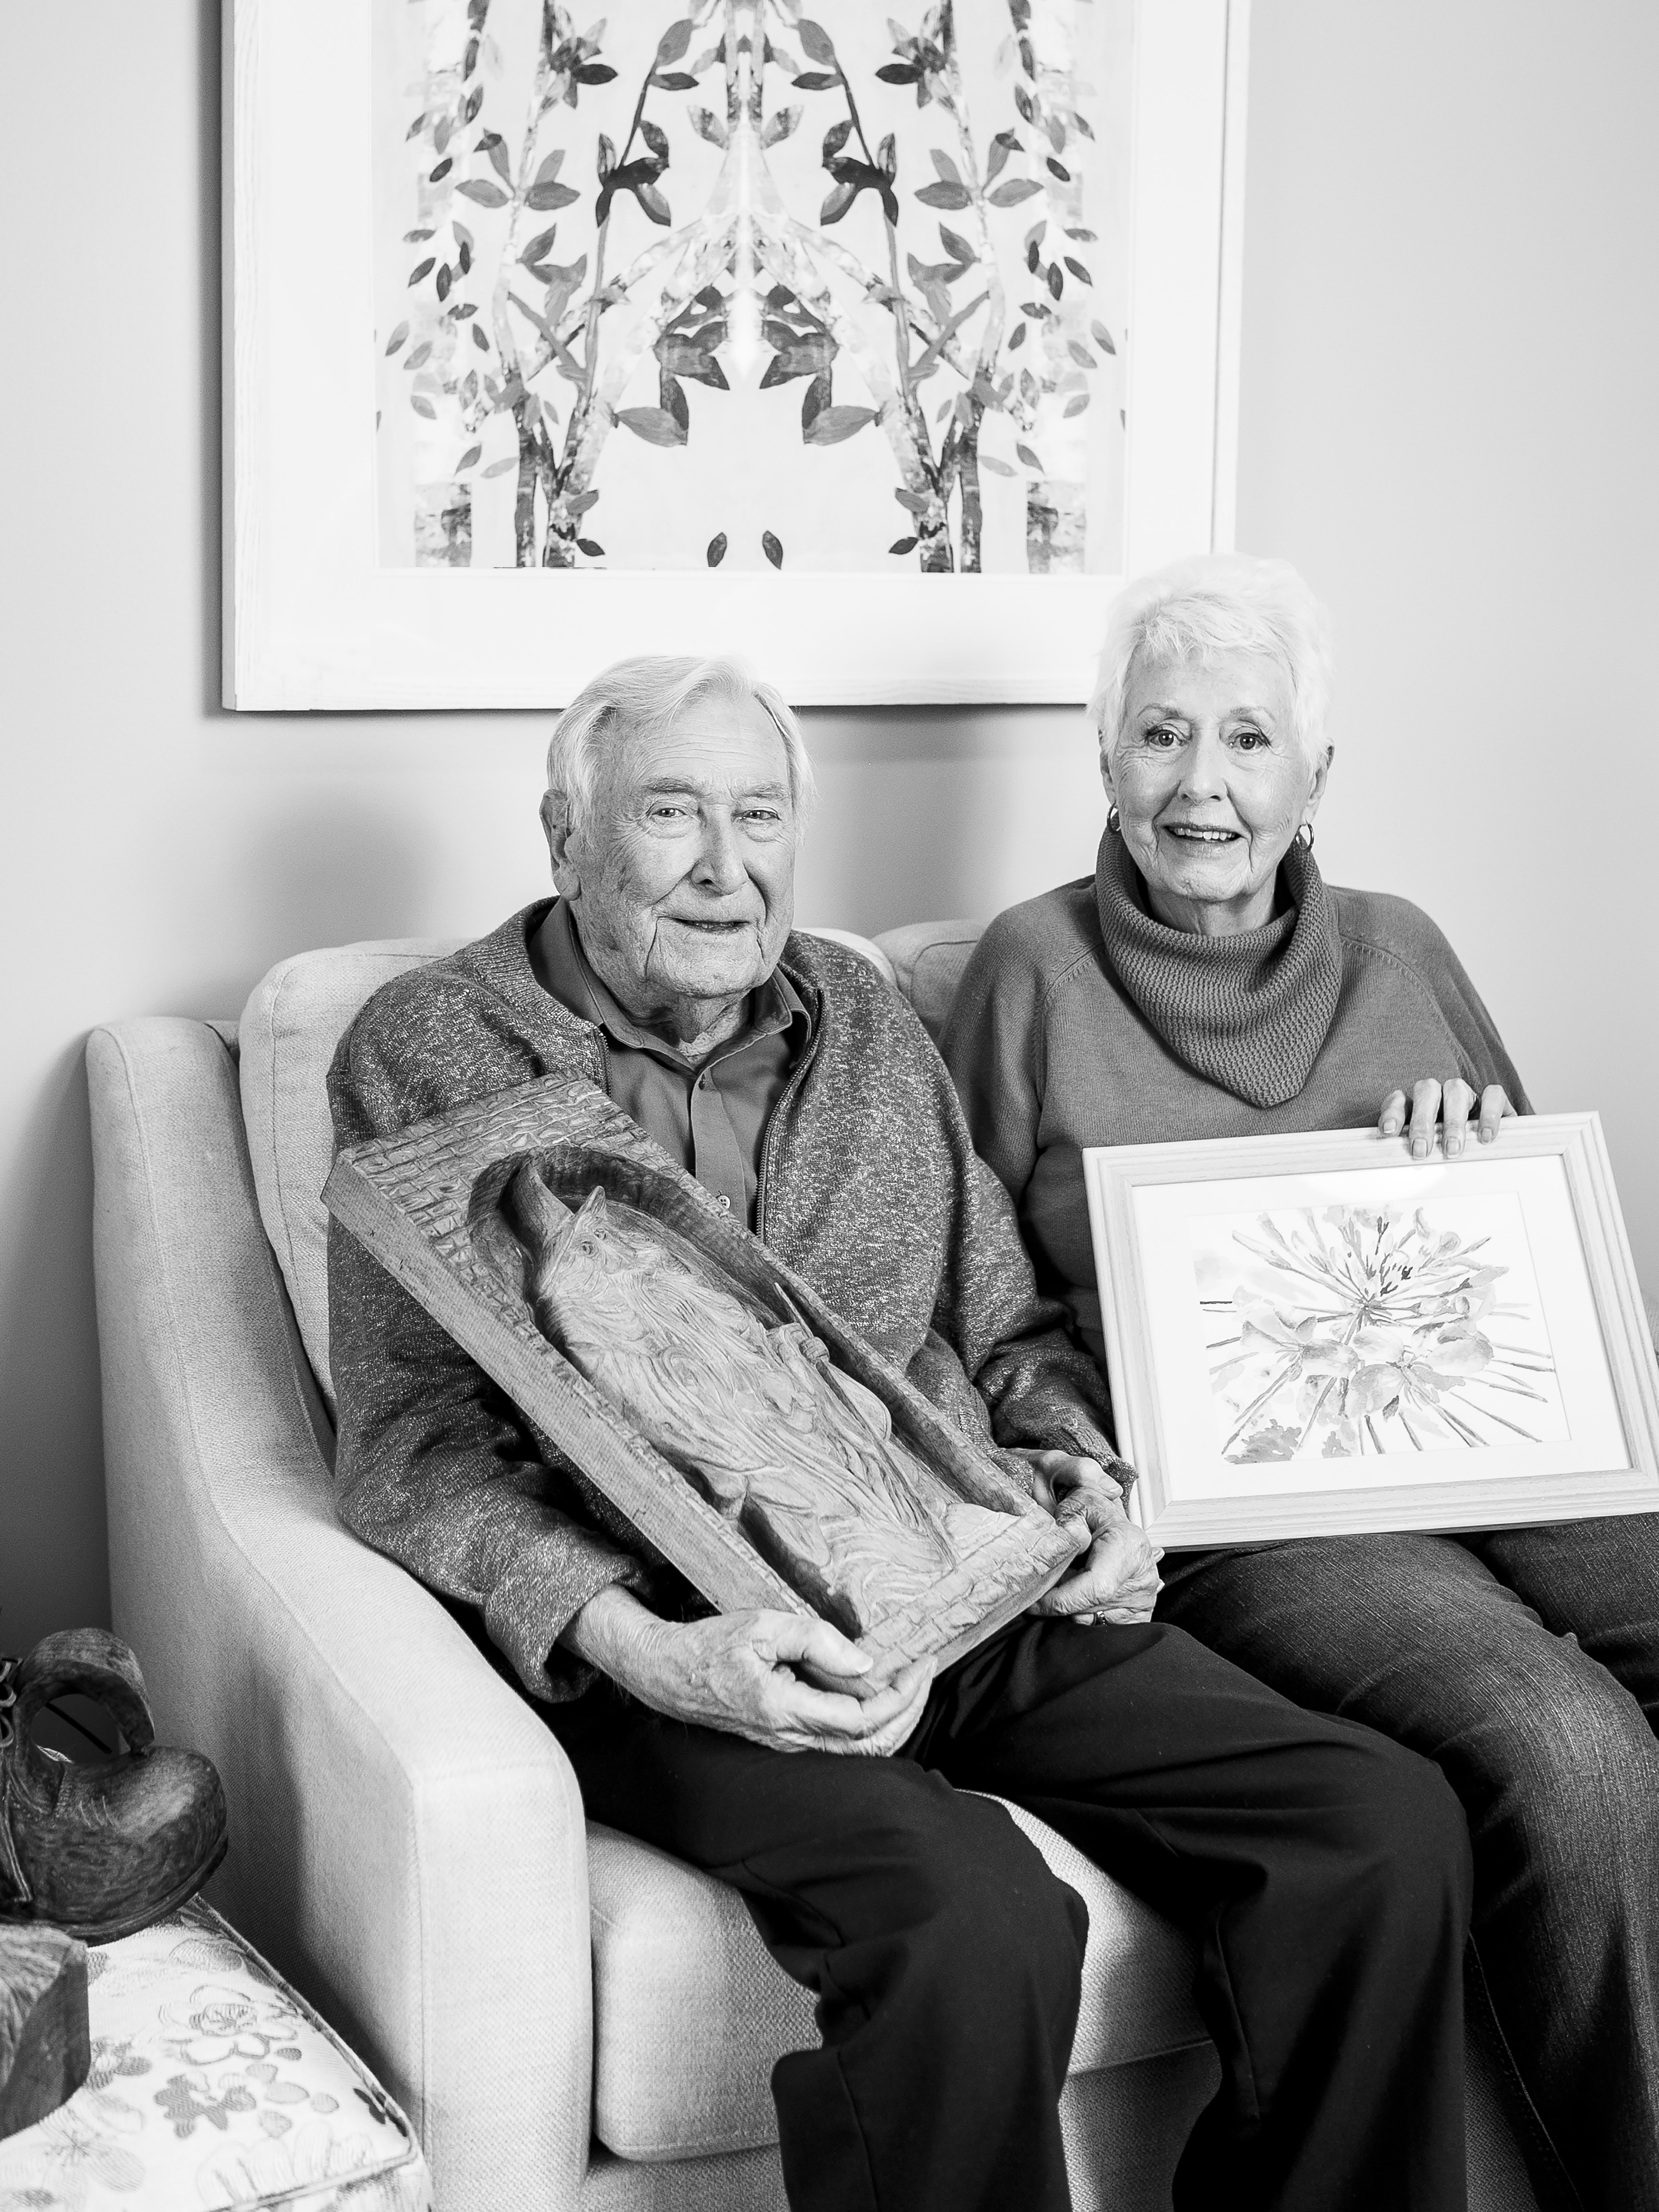 John holding a wood carving and Doris holding a painting in a black and white portrait